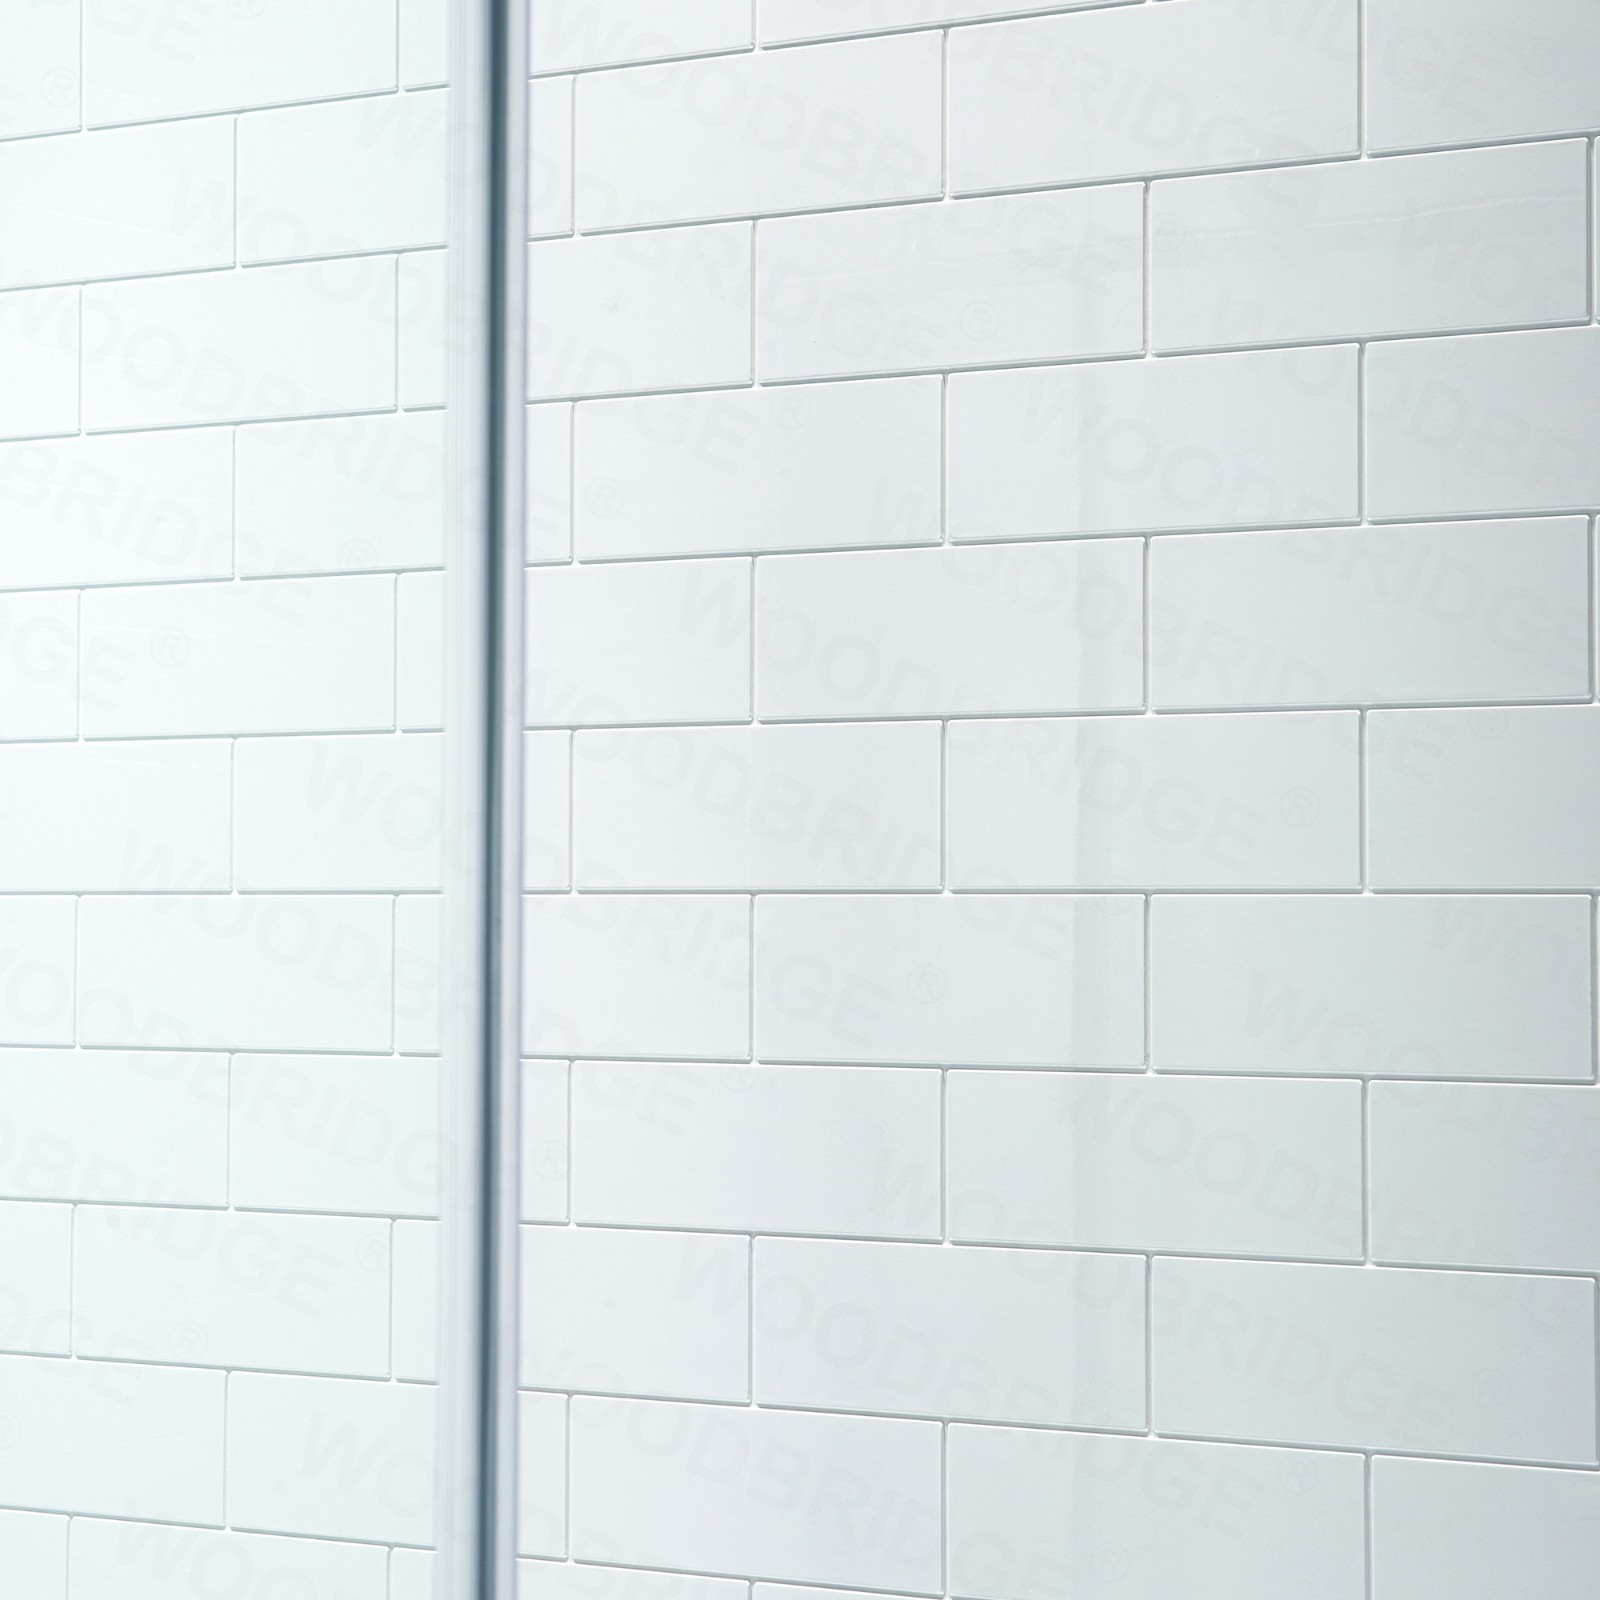  WOODBRIDGE SWP603296-1-SU-H Solid Surface 3-Panel Shower Wall Kit, 32-in L x 60-in W x 96-in H, Staggered Brick Pattern, High Gloss, White_8490